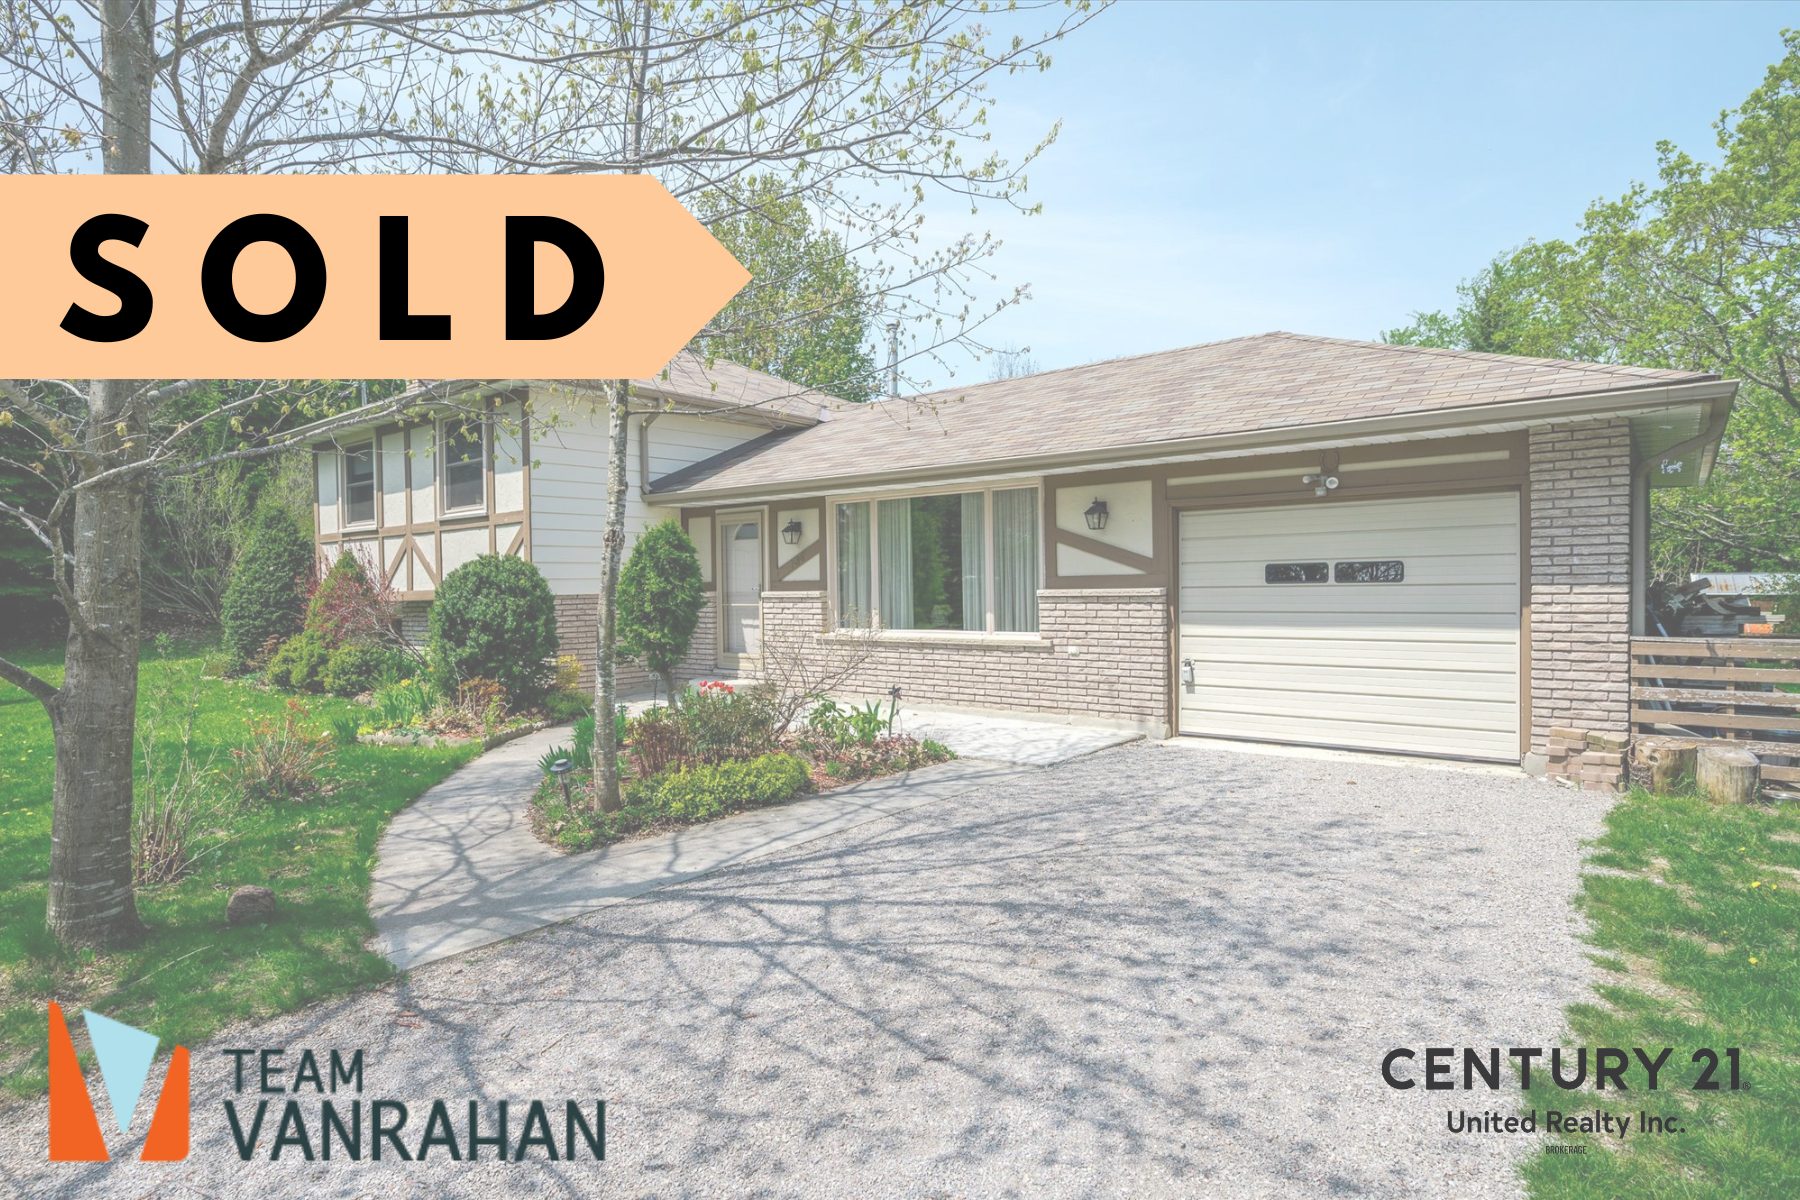 A beige ranch-style bungalow with a lovely garden out front. SOLD text on top.